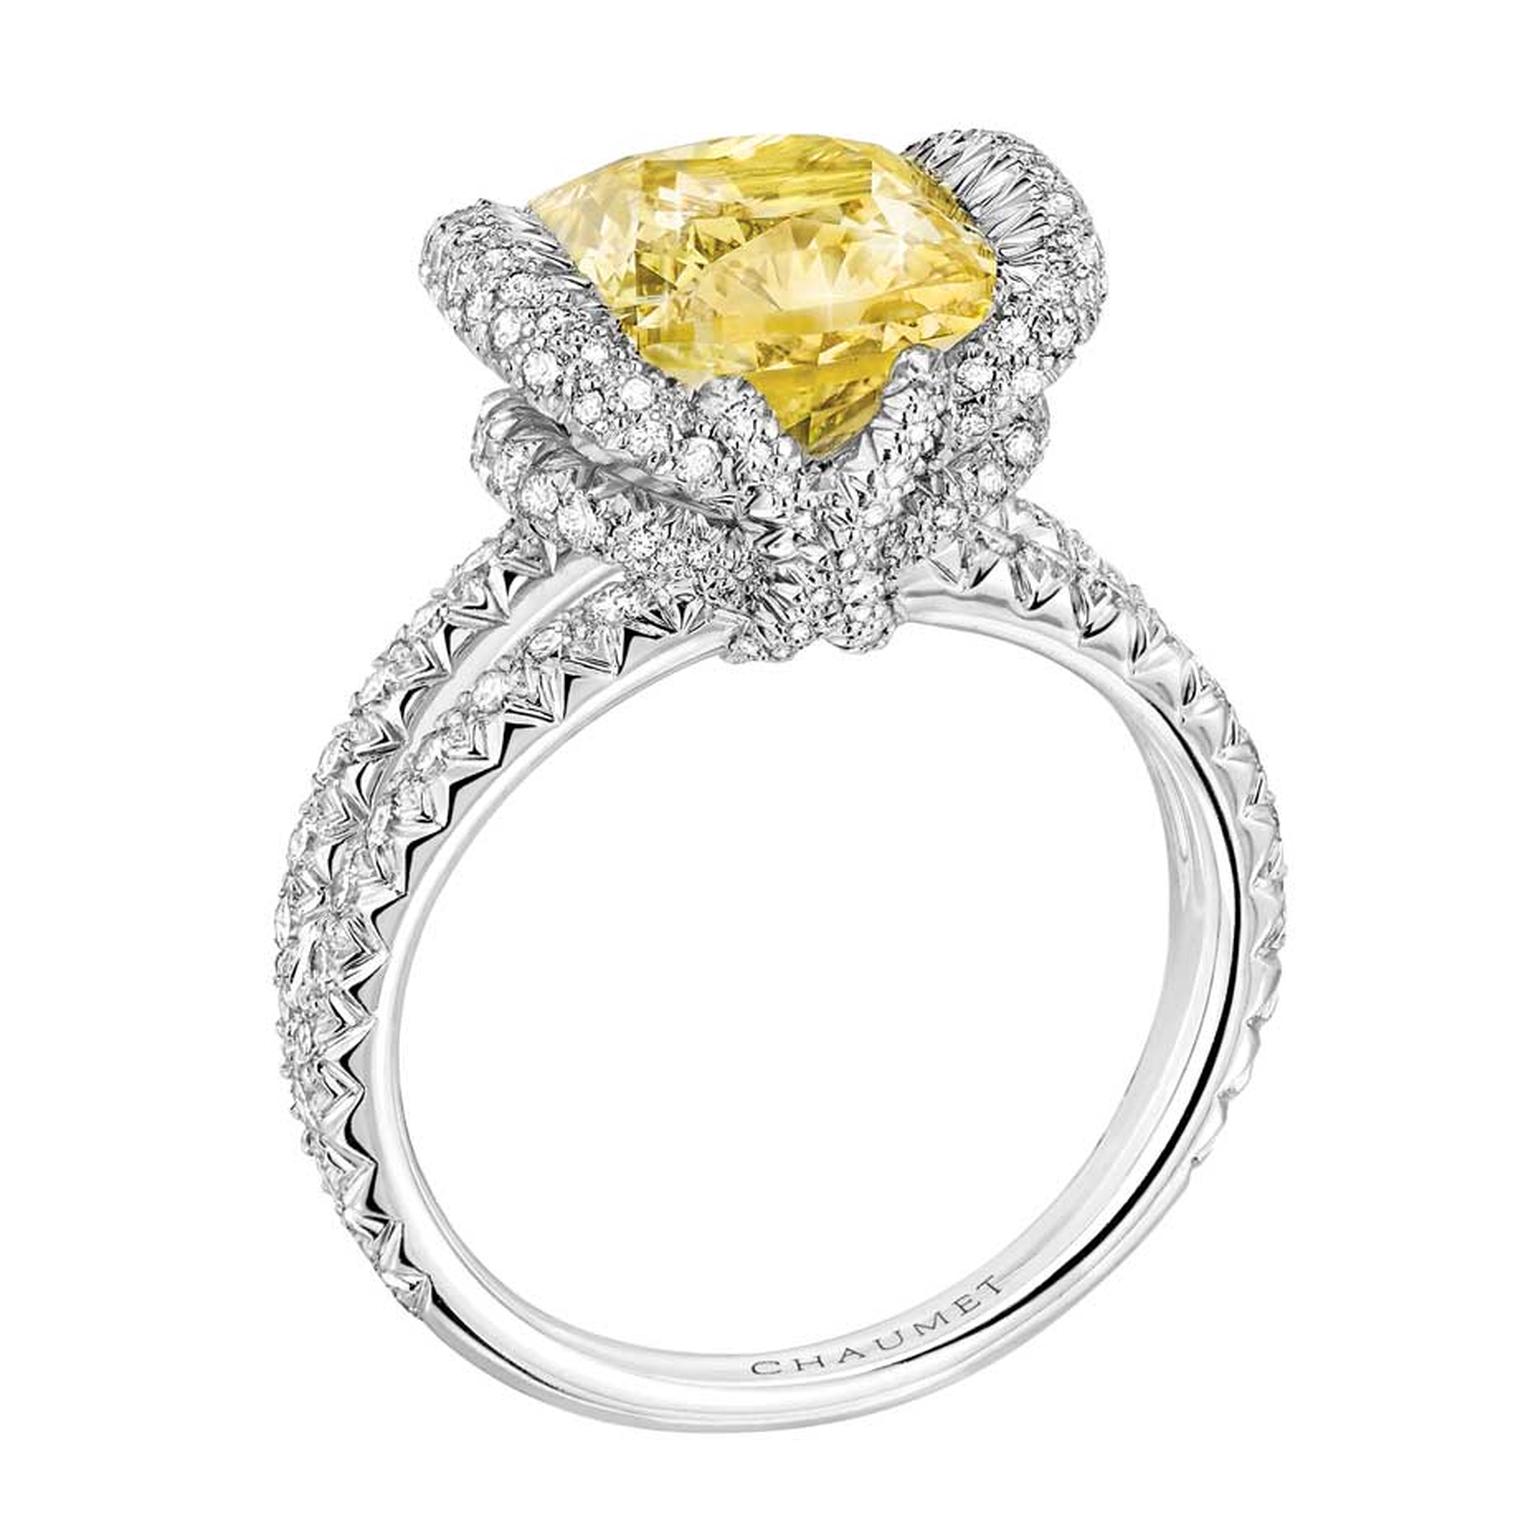 Chaumet Liens high jewellery ring in white gold featuring 144 brilliant-cut diamonds and a 3.41ct cushion-cut yellow diamond